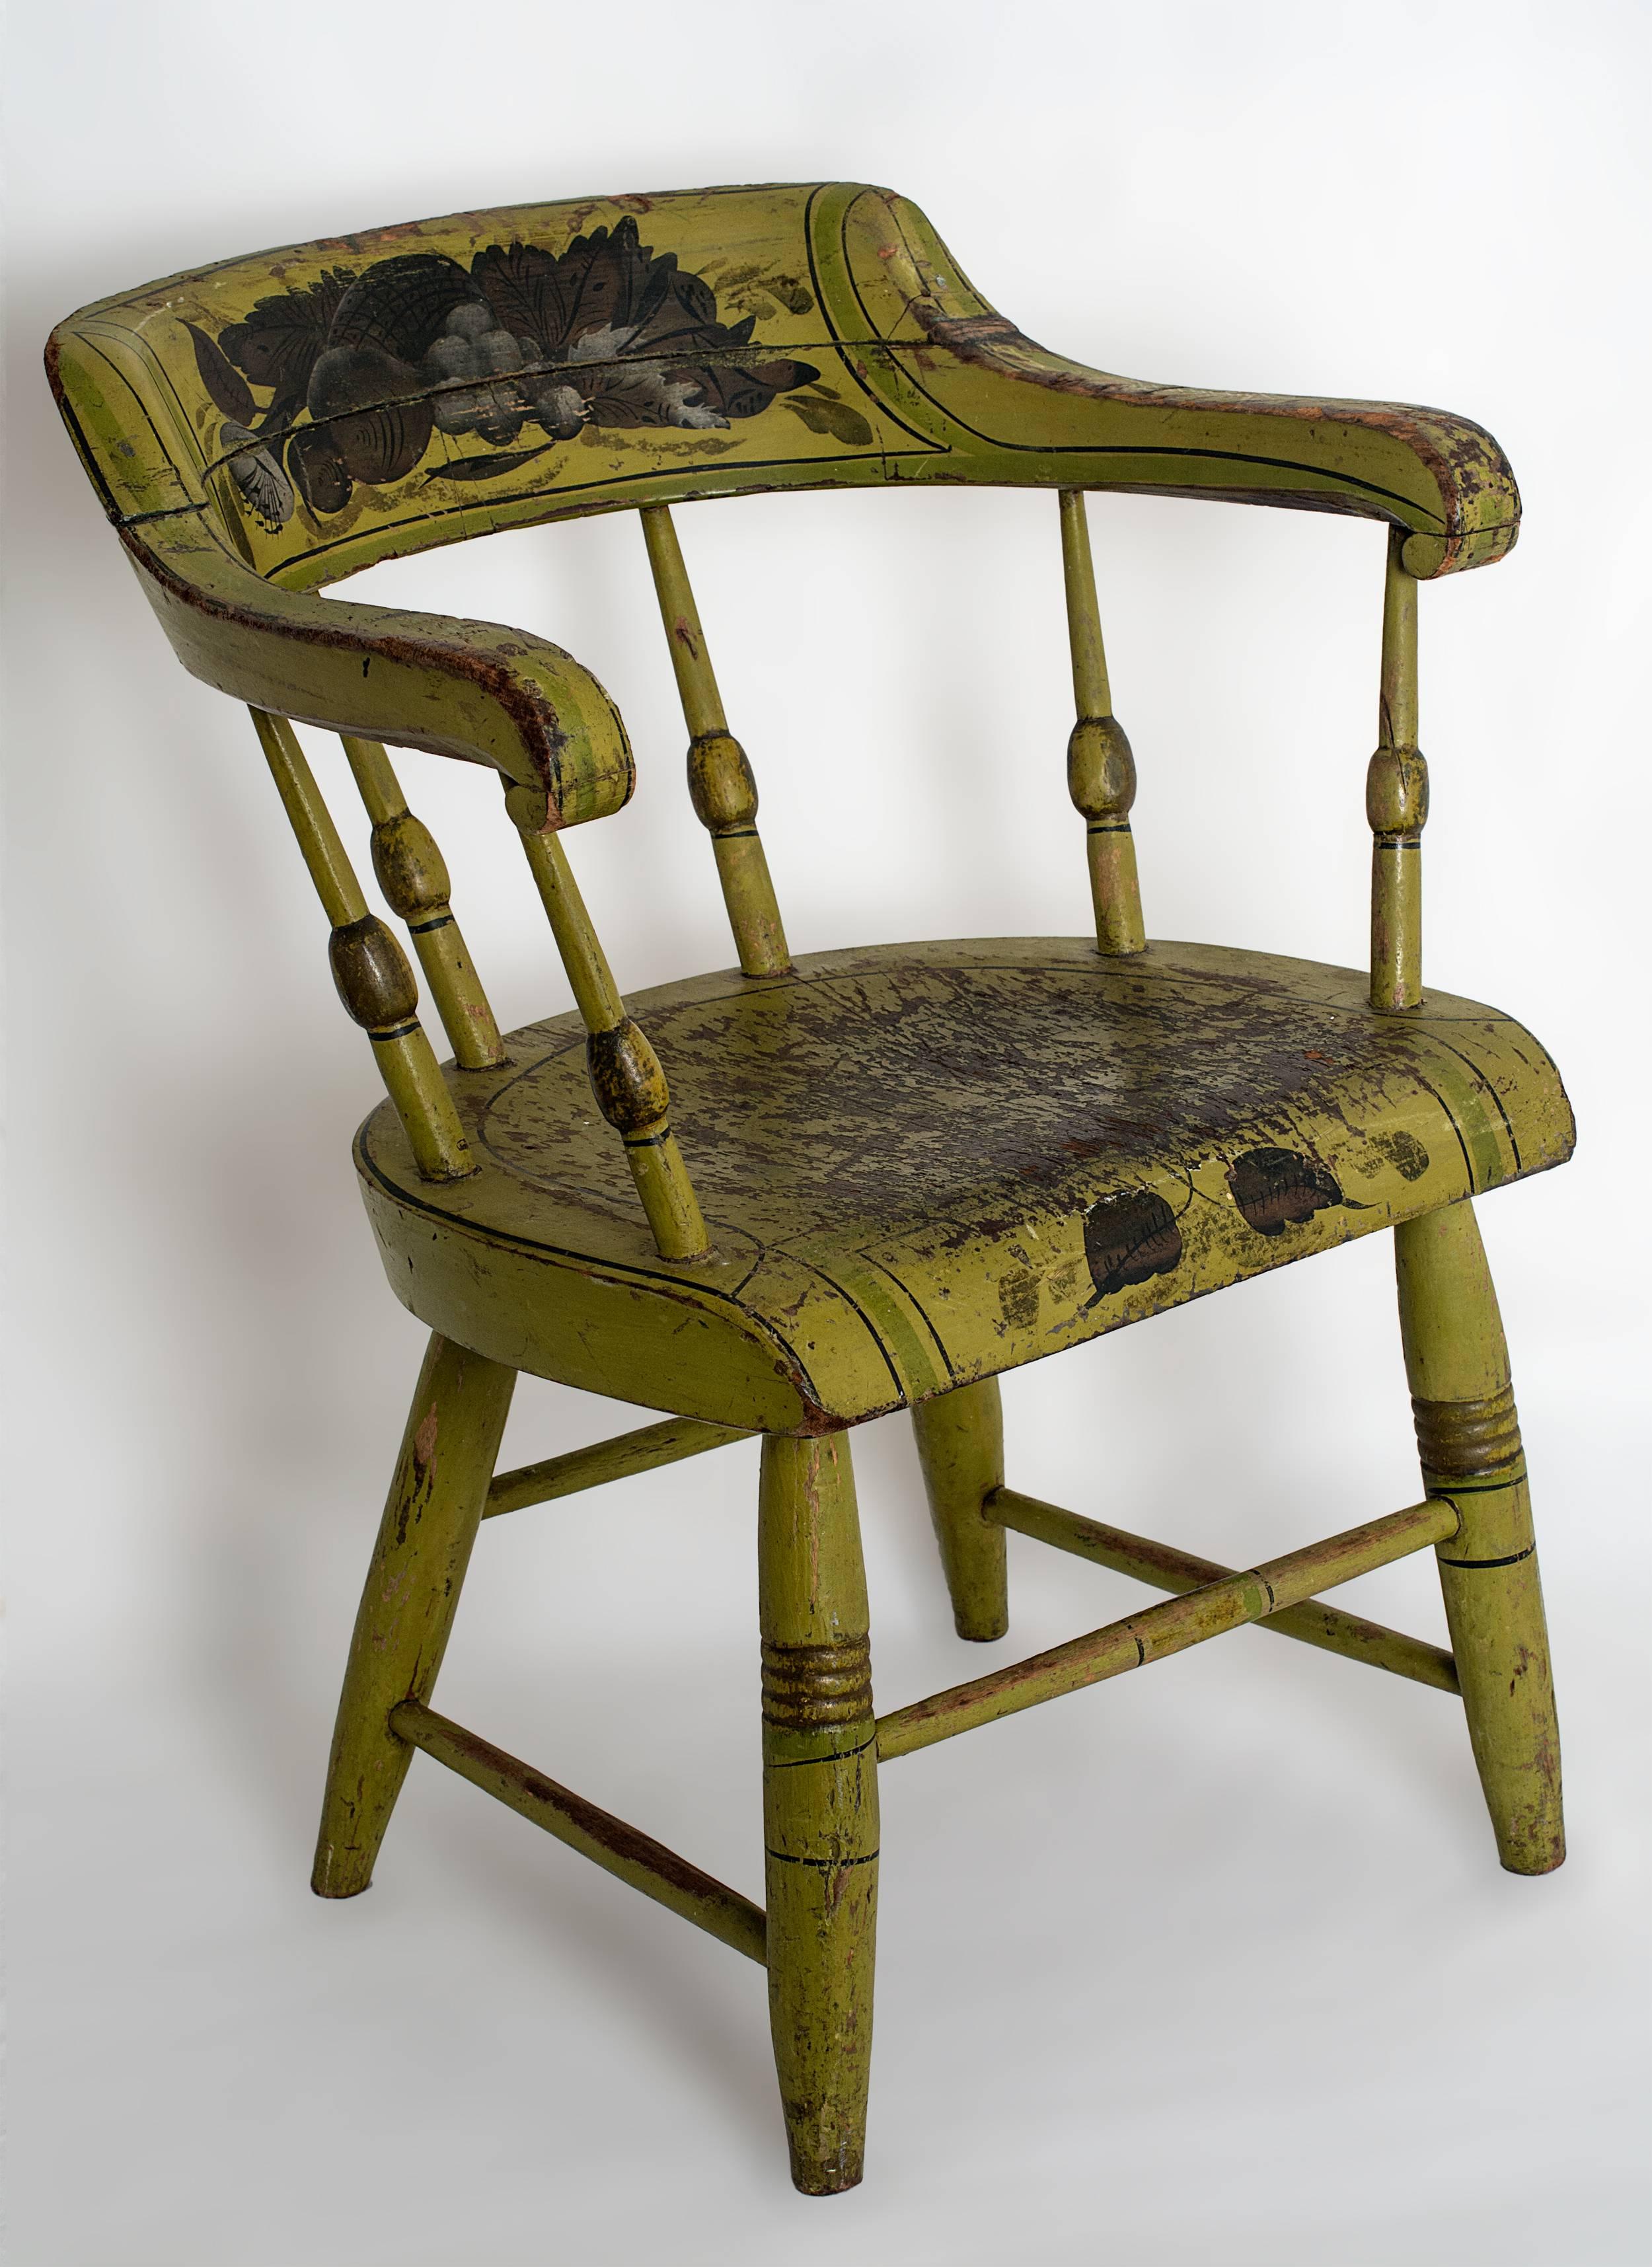 Apple green painted child’s firehouse chair with shaped back and turned
spindles and plank seat. Original paint and floral stenciling
New England, c.1860

